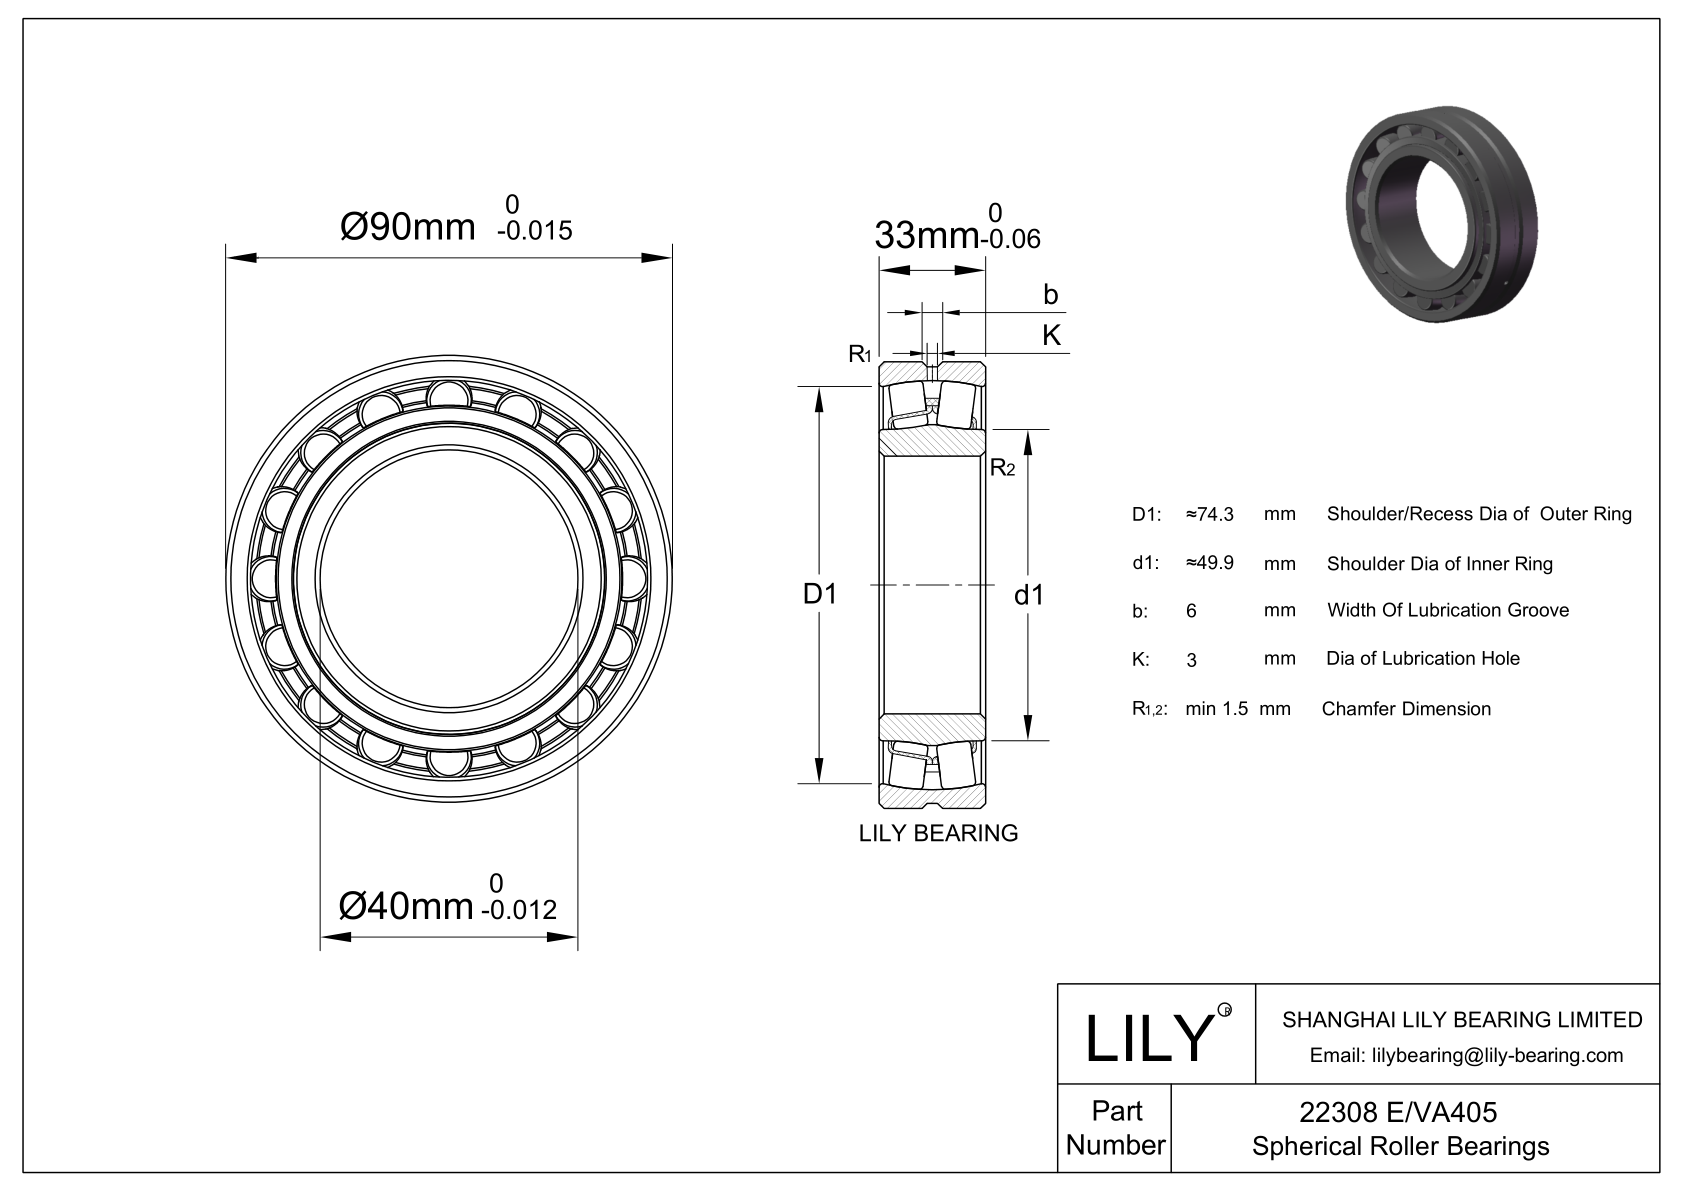 22308 E/VA405 Double Row Spherical Roller Bearing cad drawing